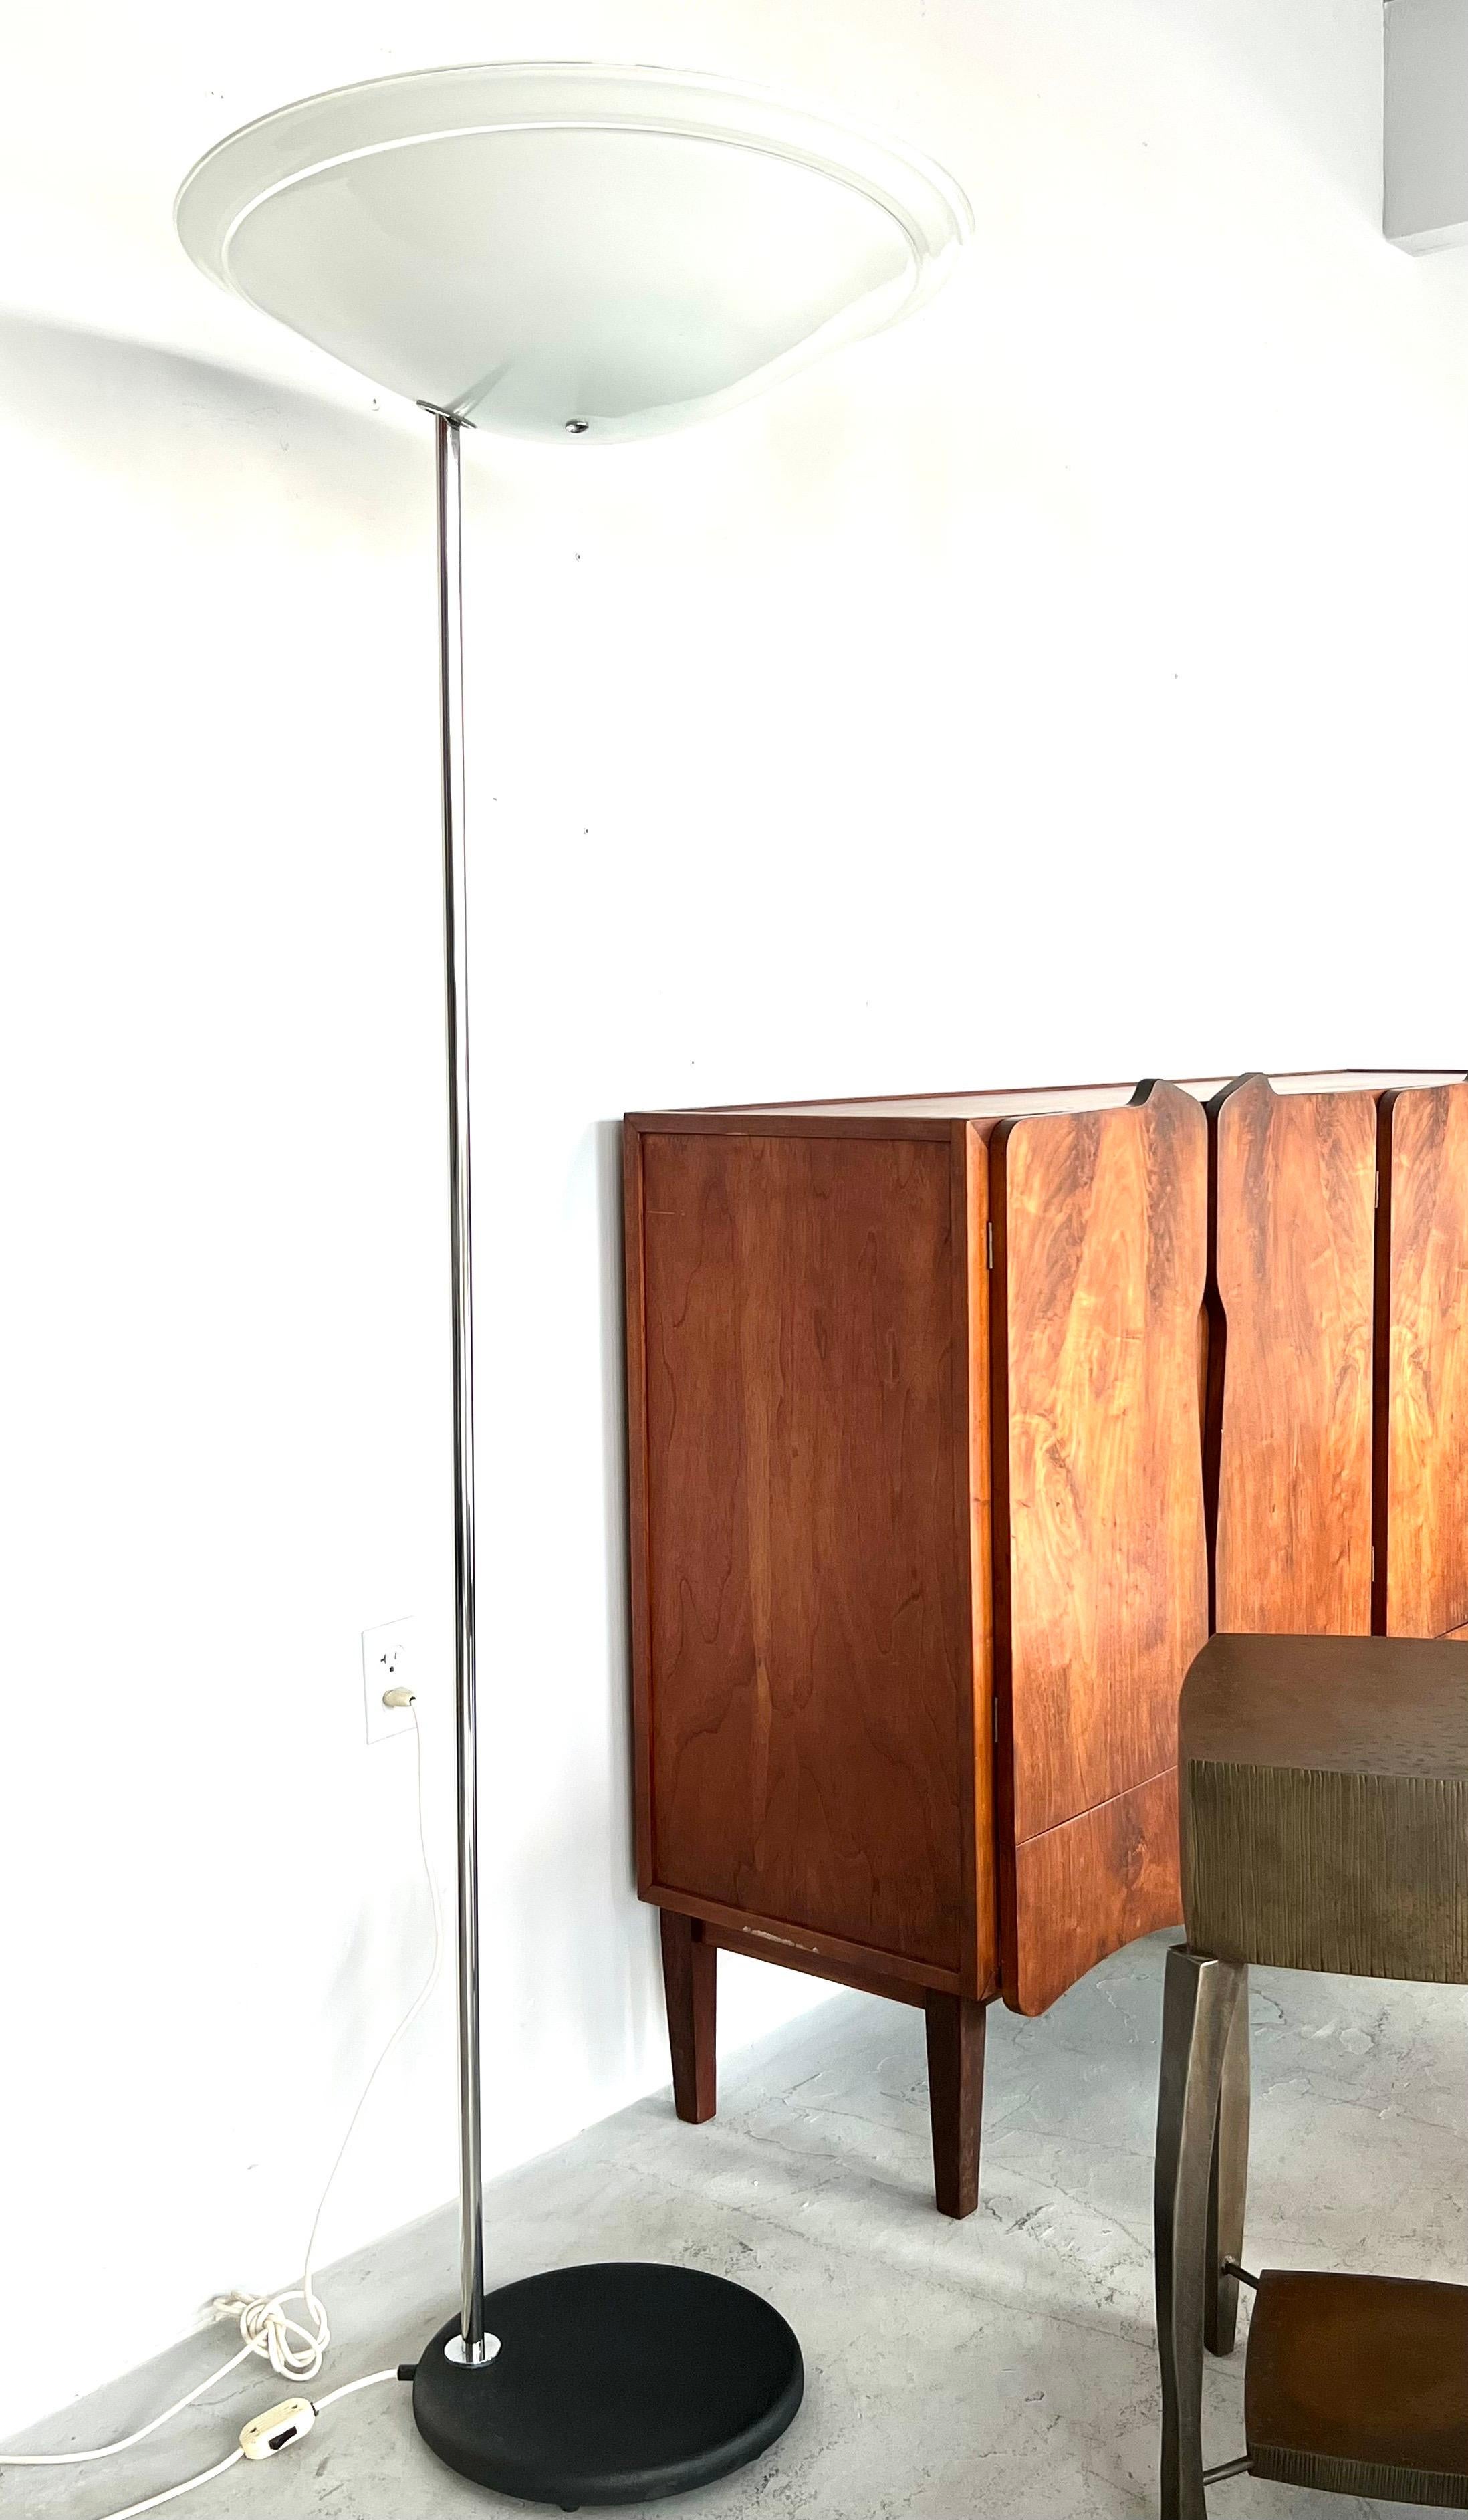 A modernist Italian floor lamp. The large cantilevered top is white Murano glass with clear banding. Nickel pole with a black enameled base. The glass bowl is 25